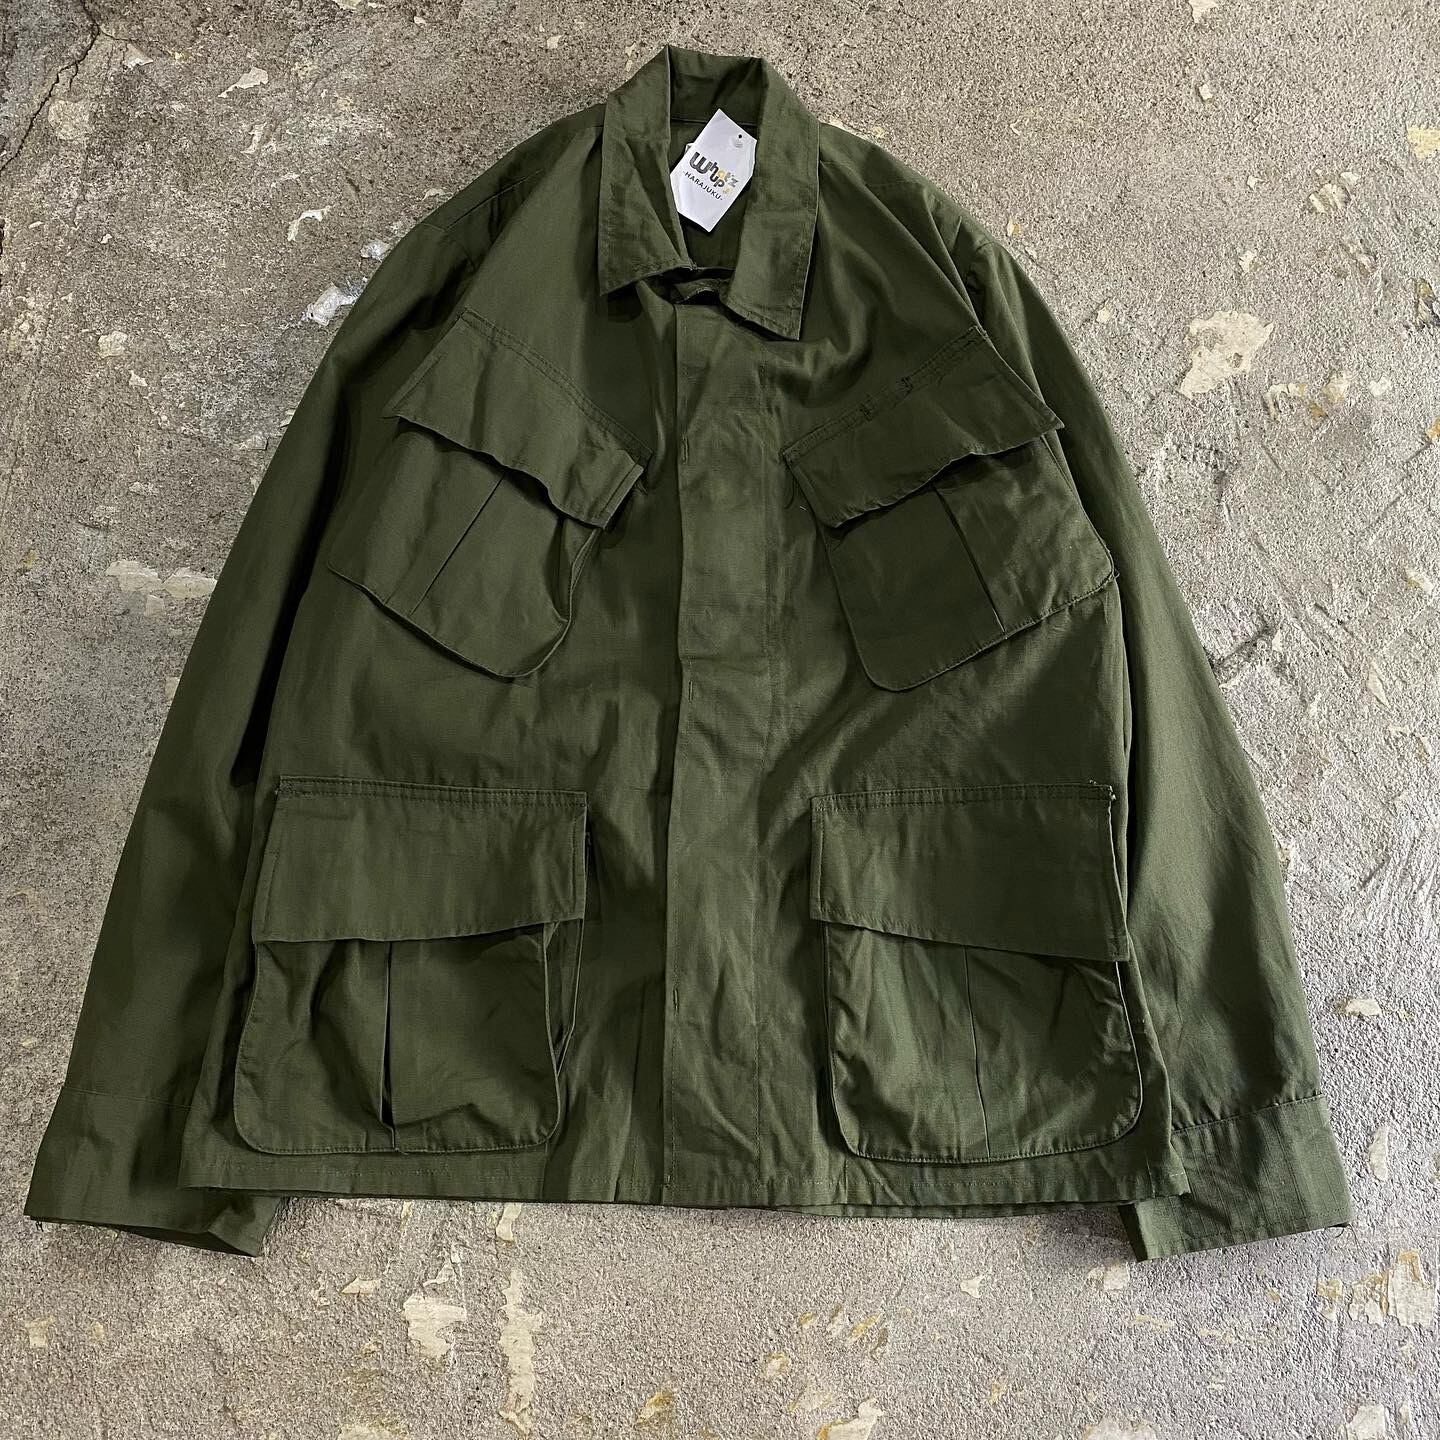 60s US ARMY jungle fatigue jacket | What'z up